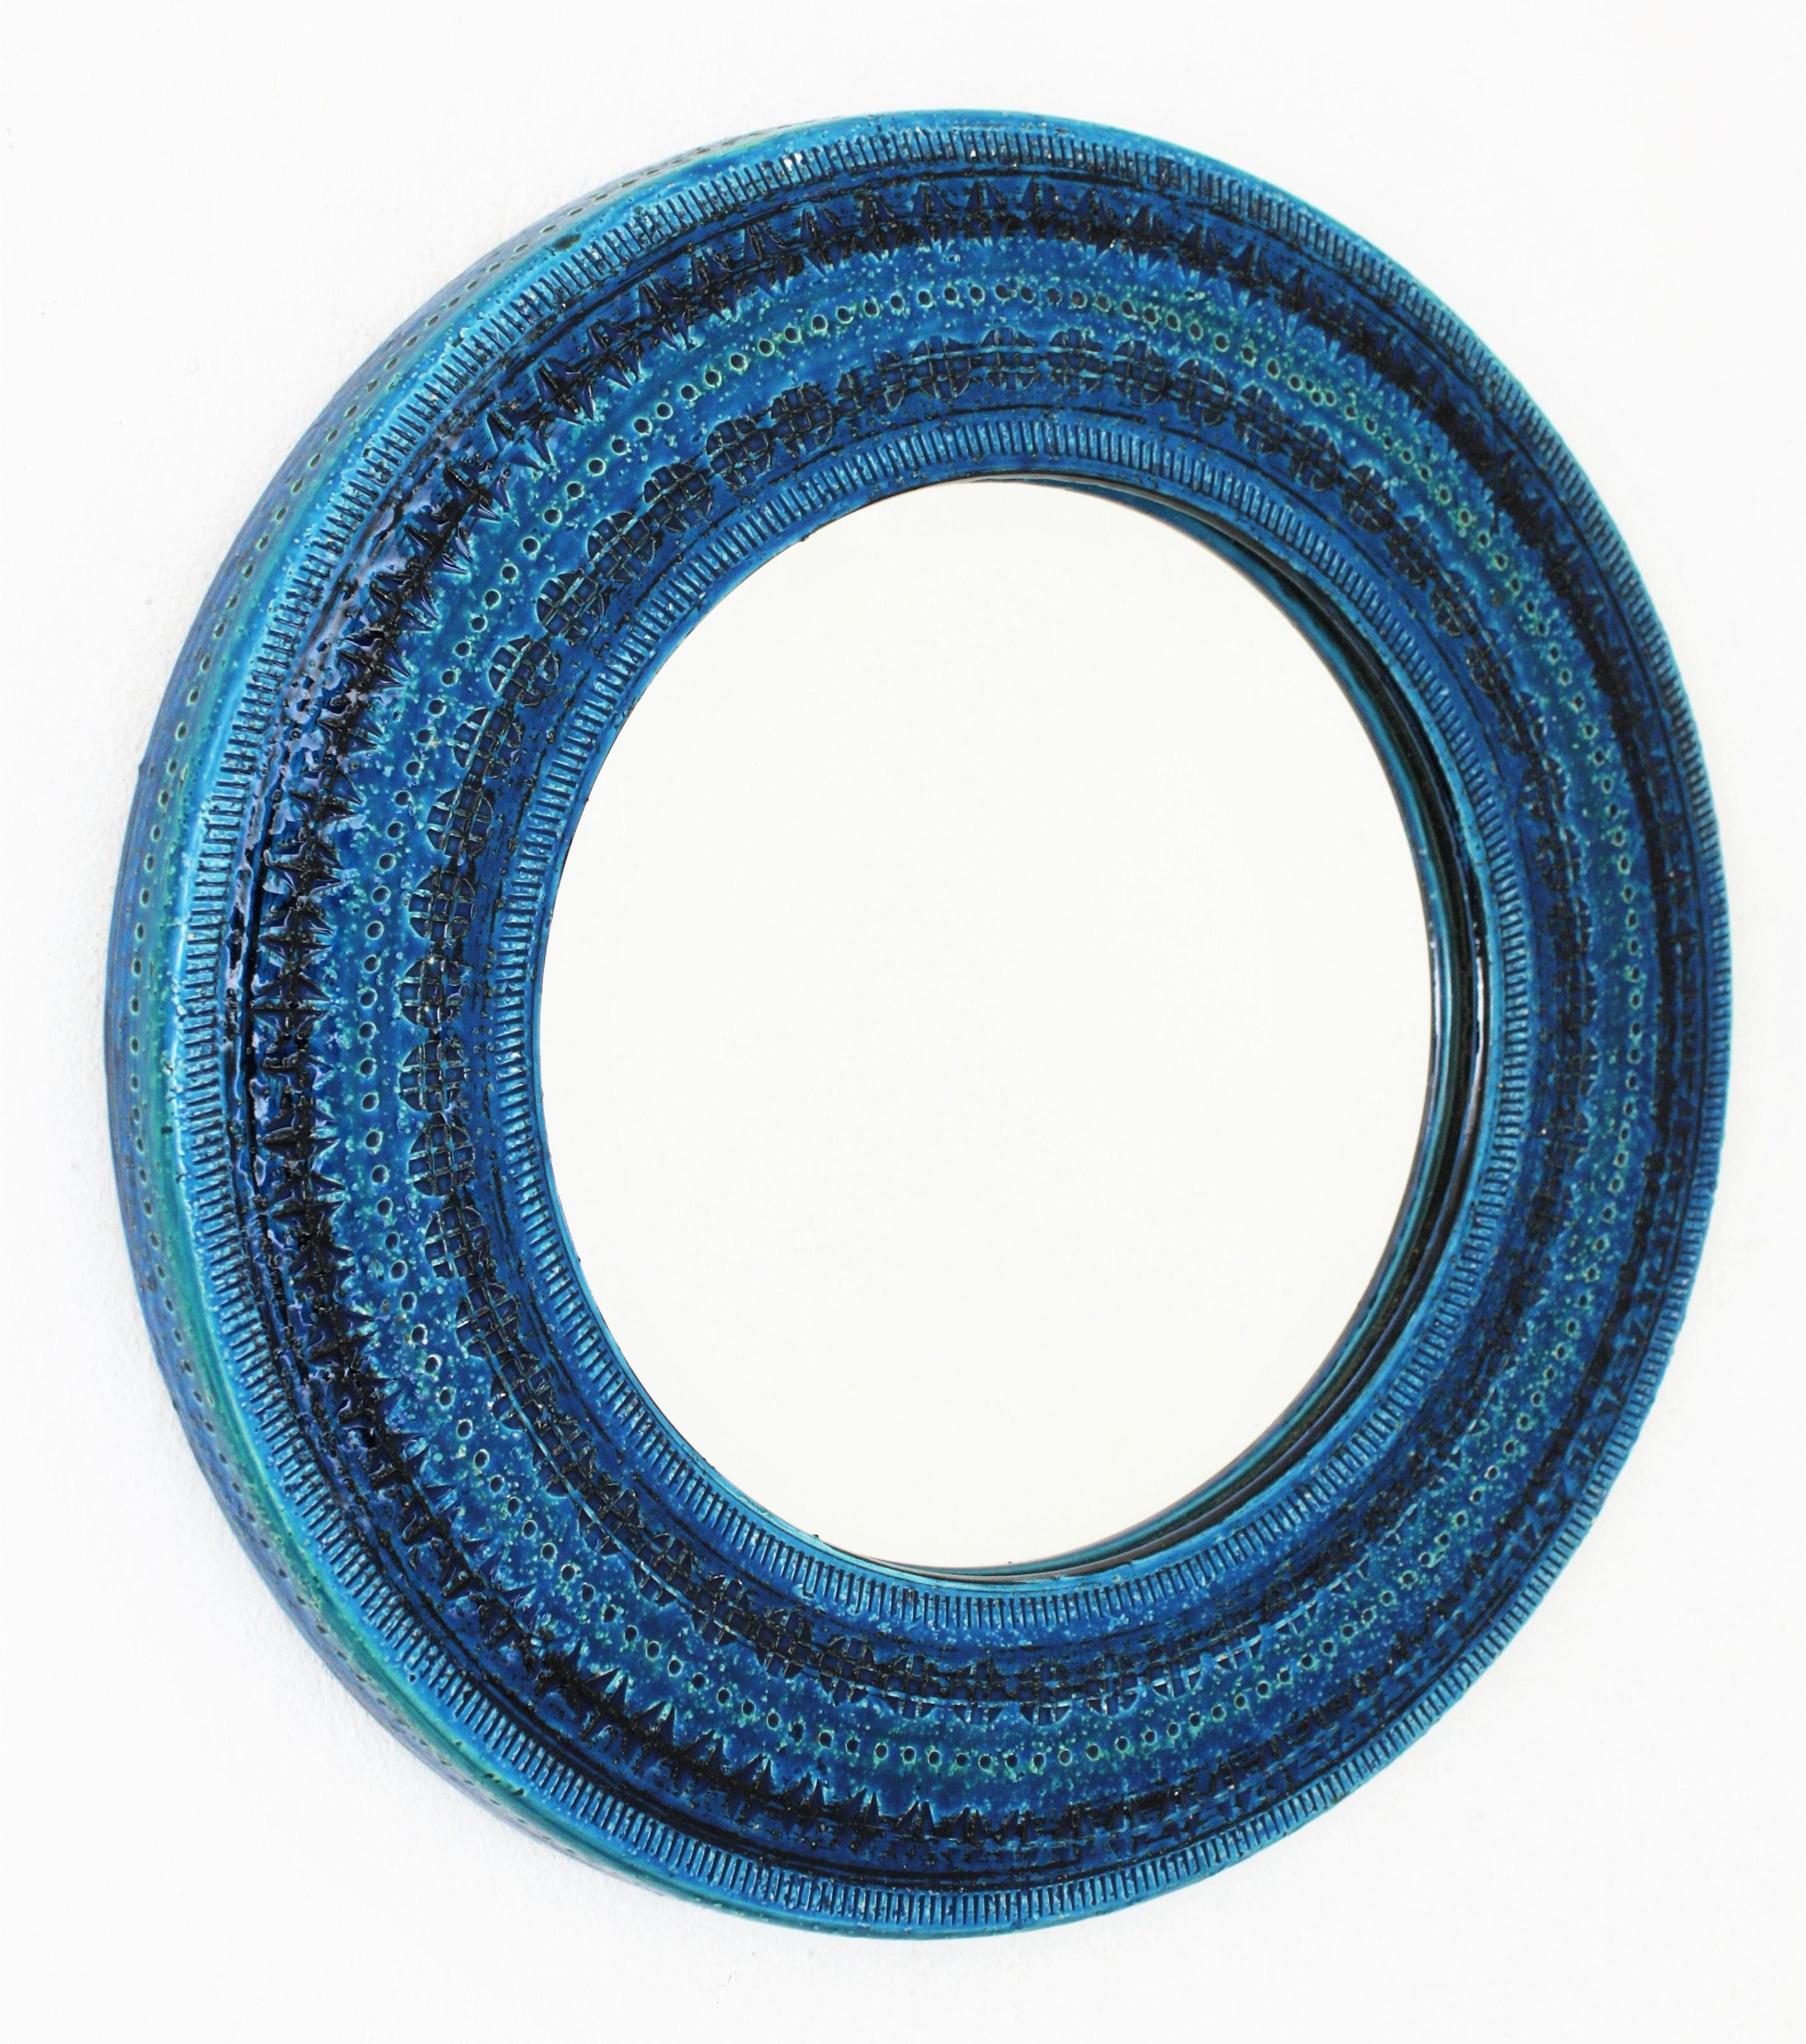 Italian Mid-Century Modern handcrafted blue terracotta glazed ceramic circular mirror with hand carved geometric designs in a vibrant turquoise and cobalt blue colors. Rimini blue collection designed by Aldo Londi for Bitossi. Italy, 1960s. 
Glass